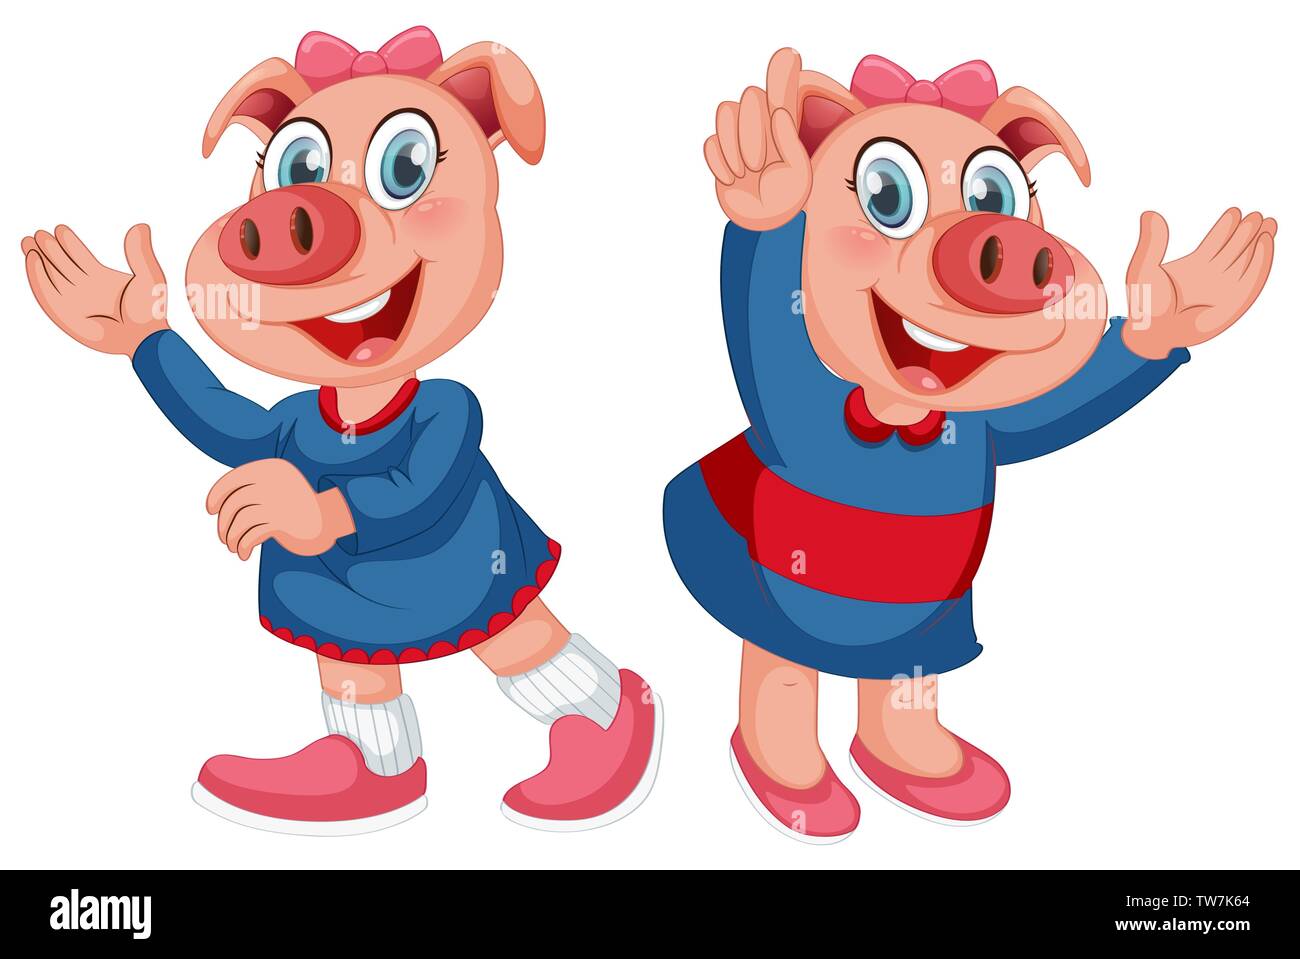 Set of cute pig character illustration Stock Vector